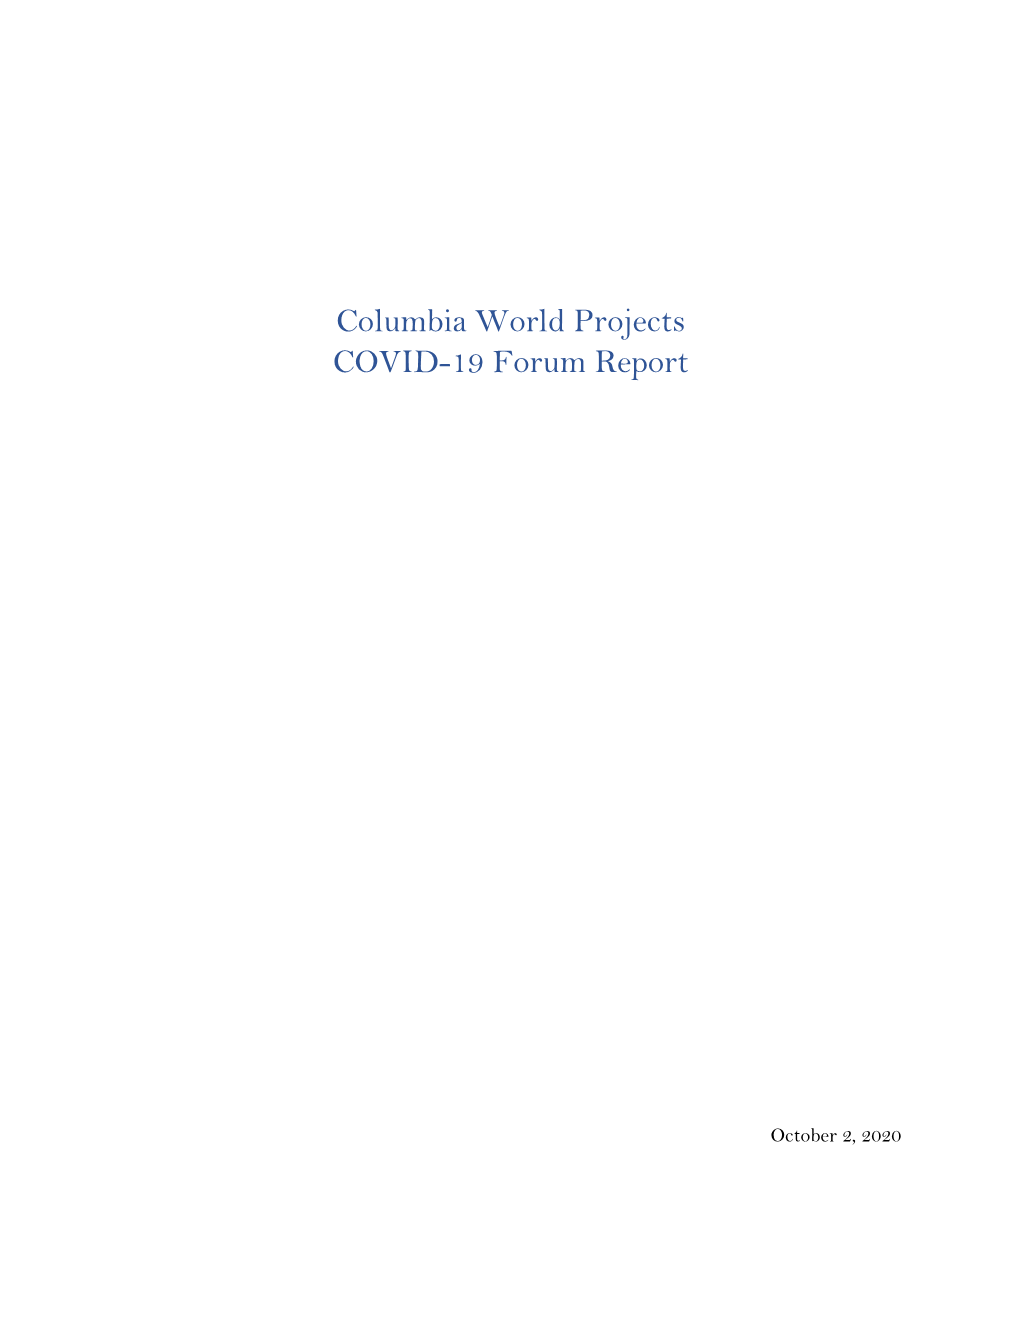 Columbia World Projects COVID-19 Forum Report